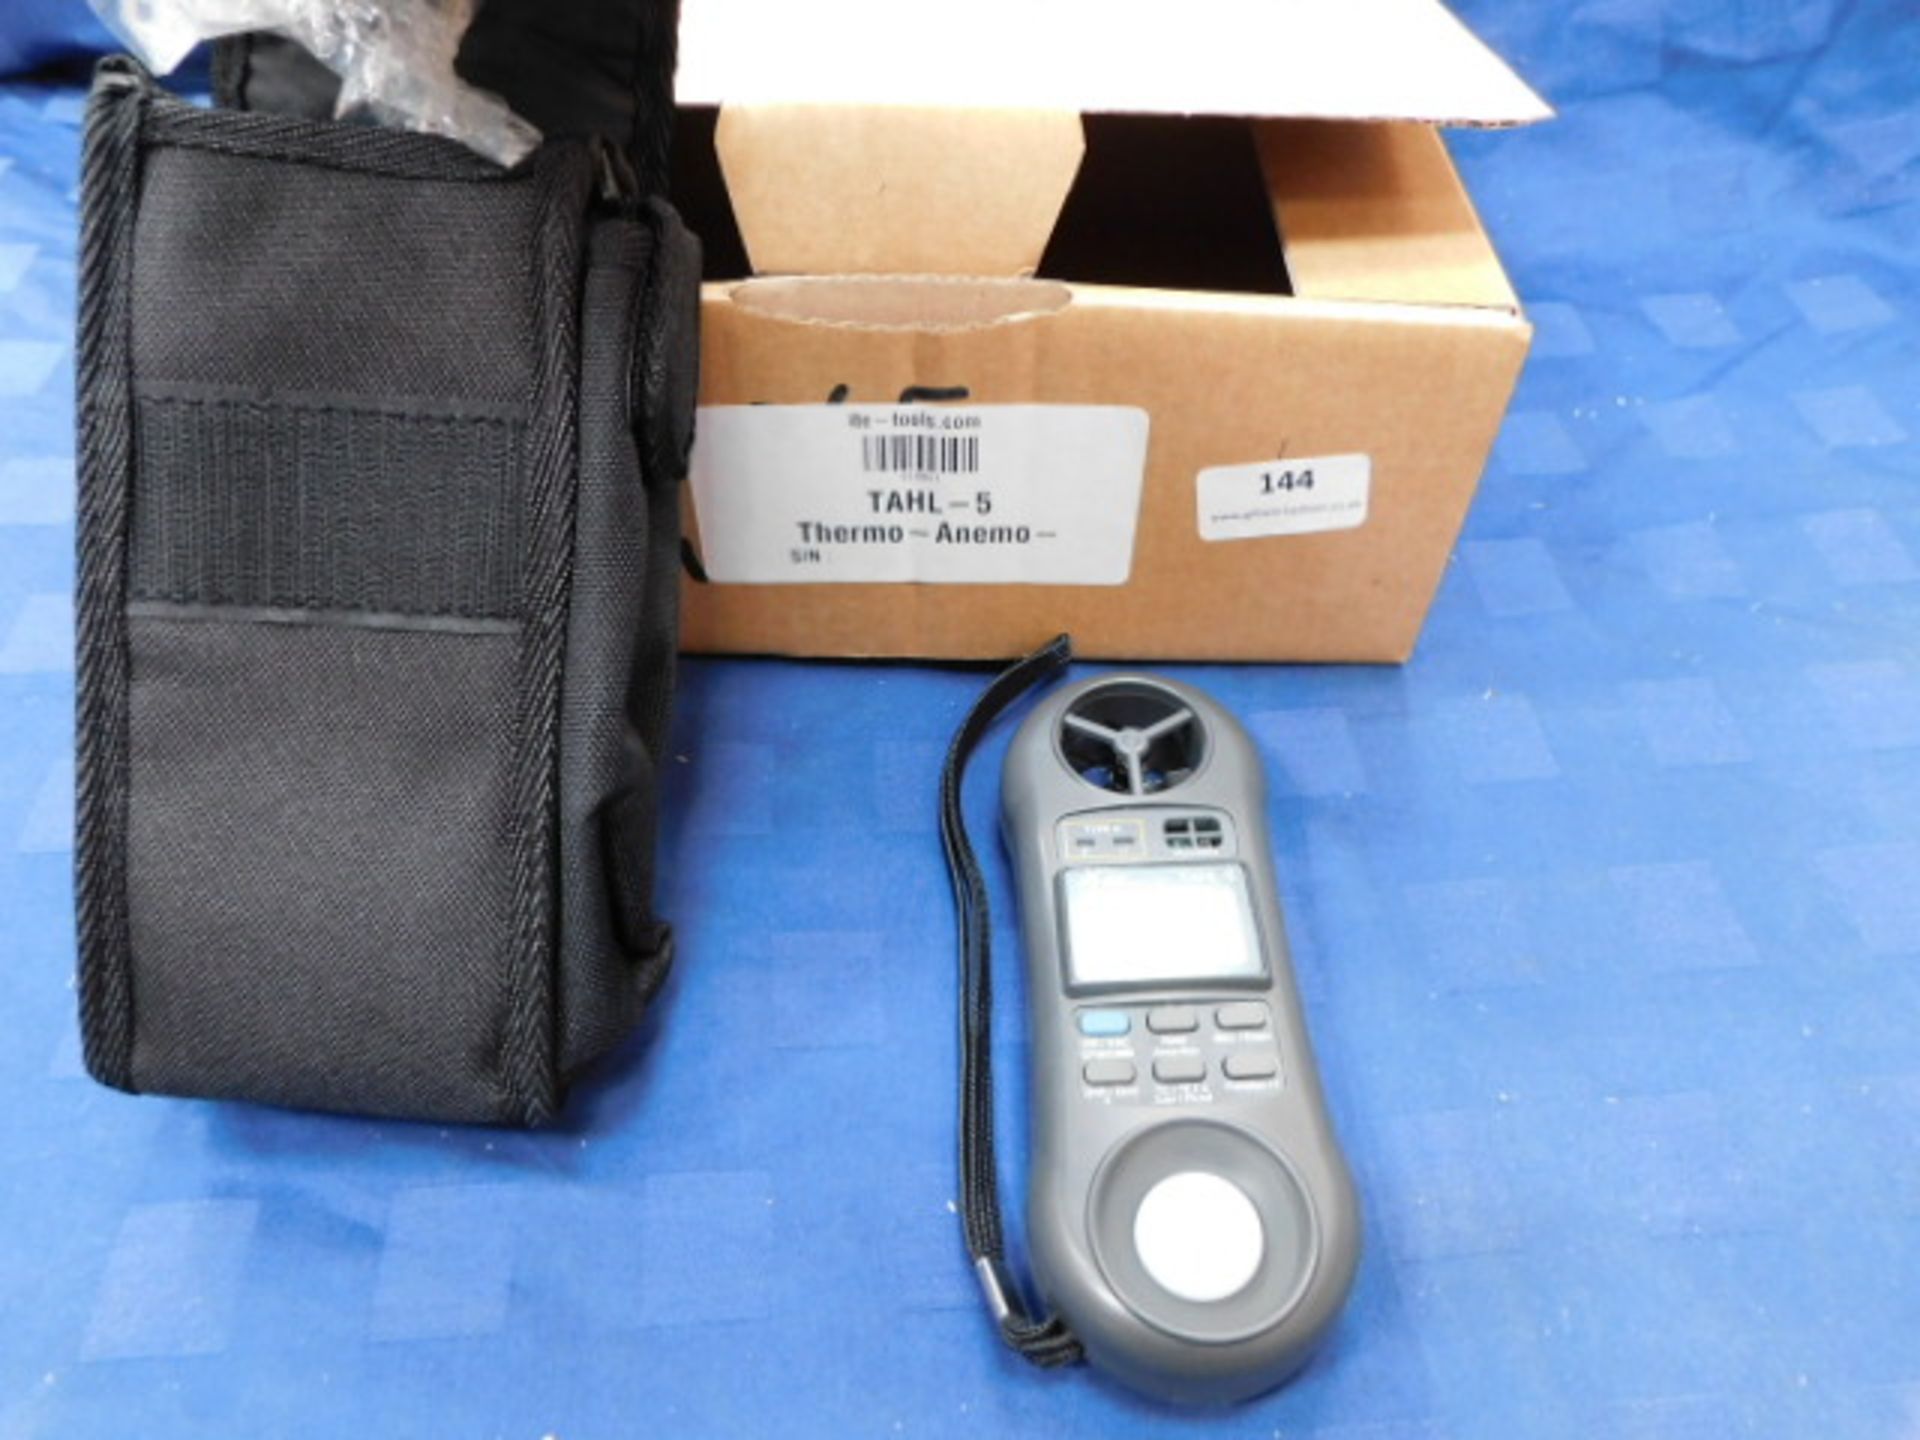 * TAHL-5 Thermo-Anemo-Humidity-Light meter